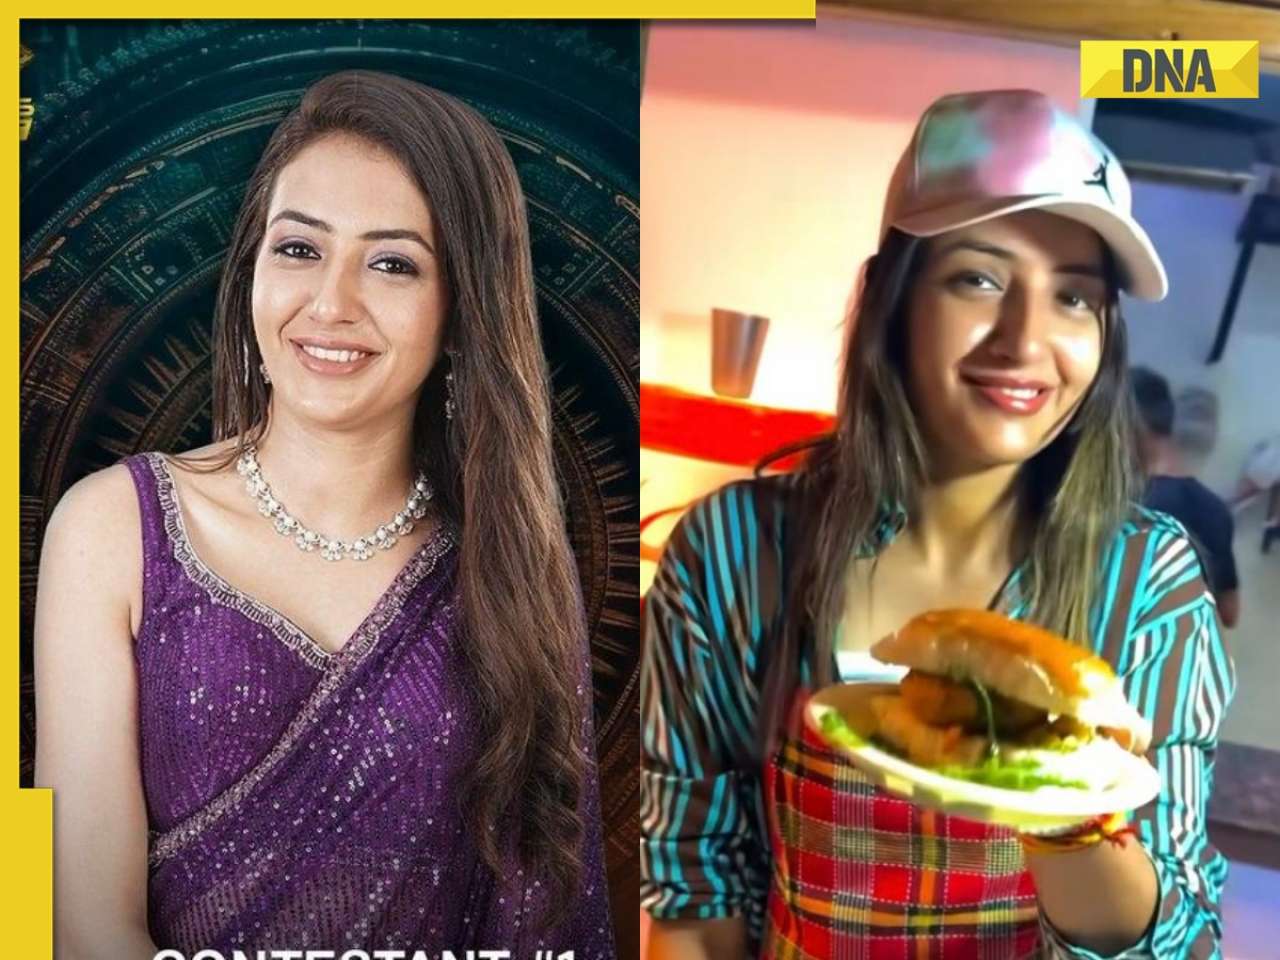 Bigg Boss OTT 3 contestant Chandrika Dixit earned this whopping amount per day by selling vada pav on street